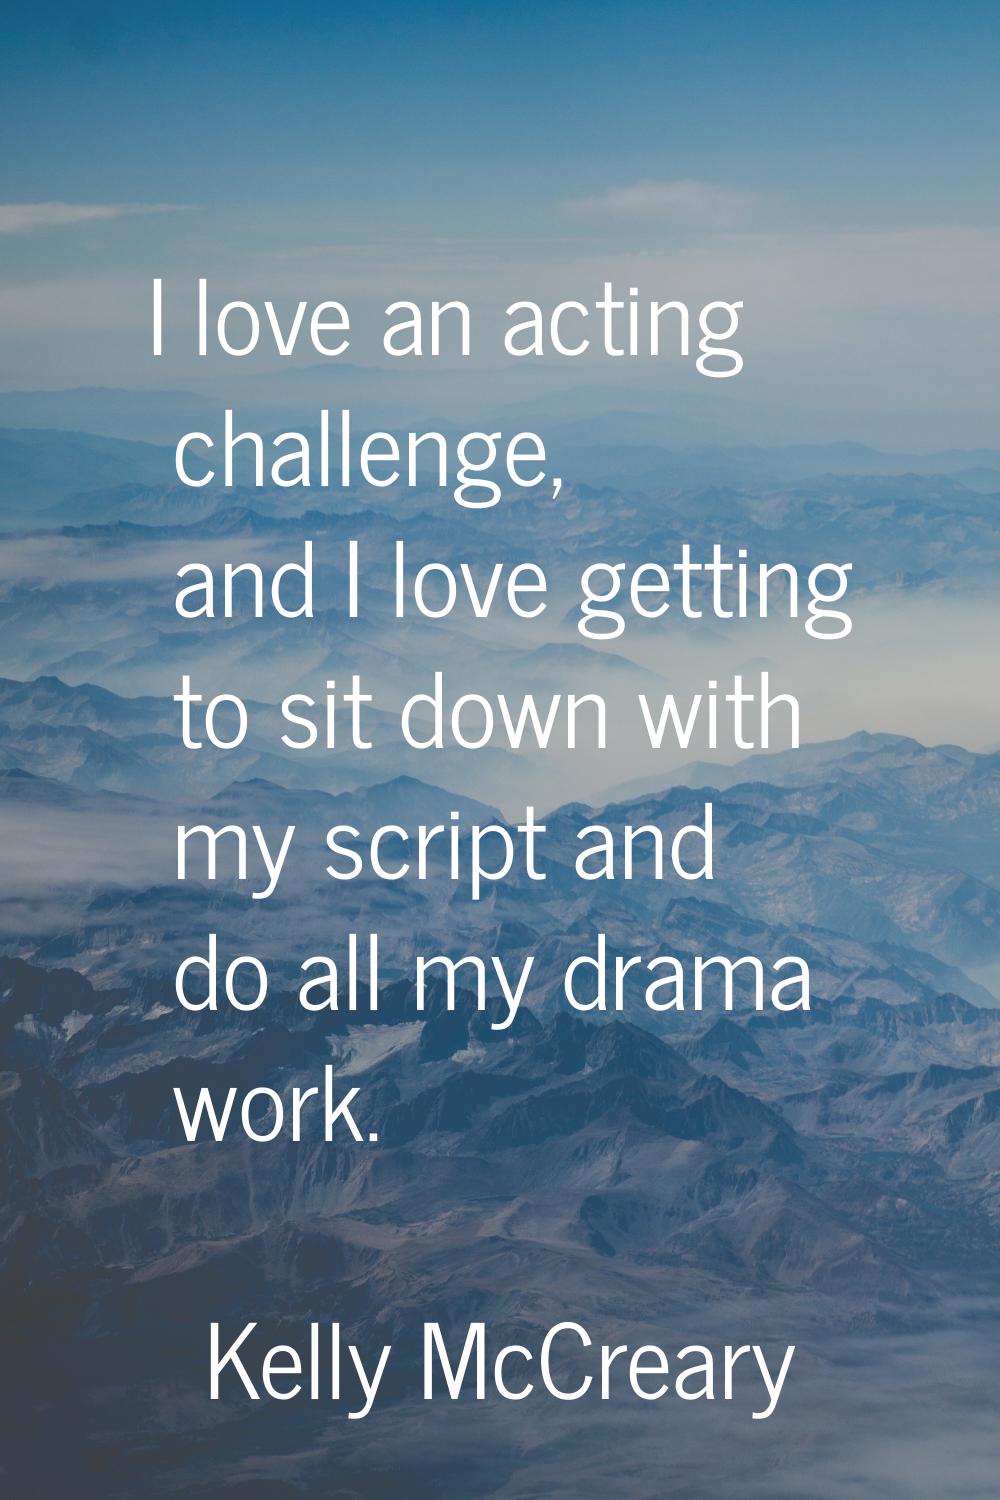 I love an acting challenge, and I love getting to sit down with my script and do all my drama work.